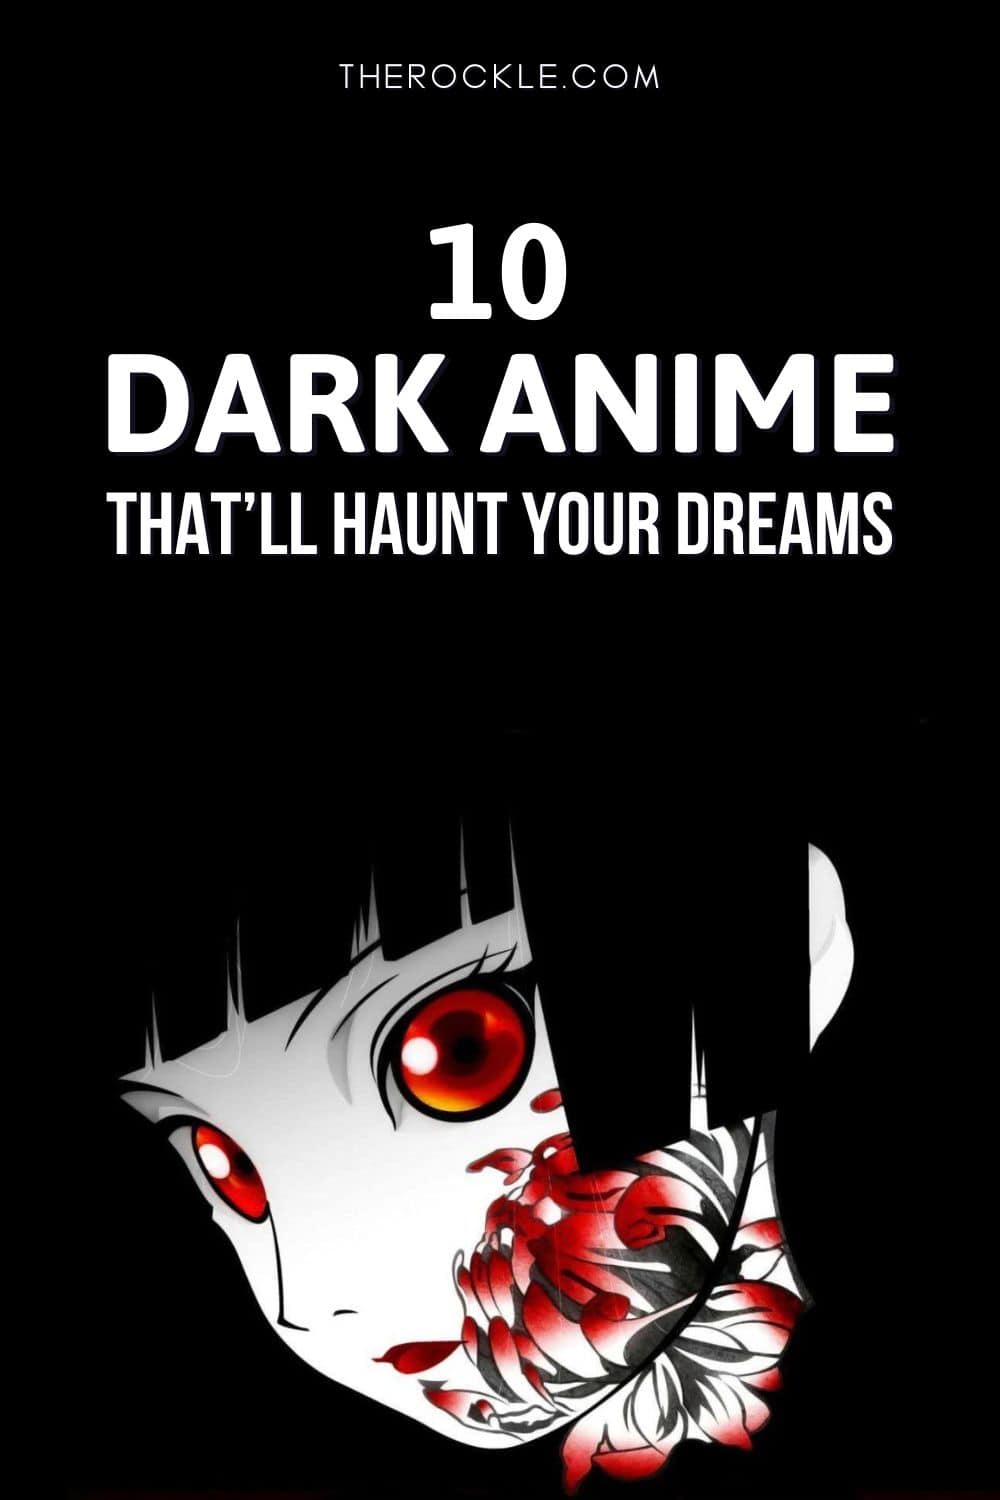 10 Dark Anime That Will Haunt Your Dreams - The Rockle